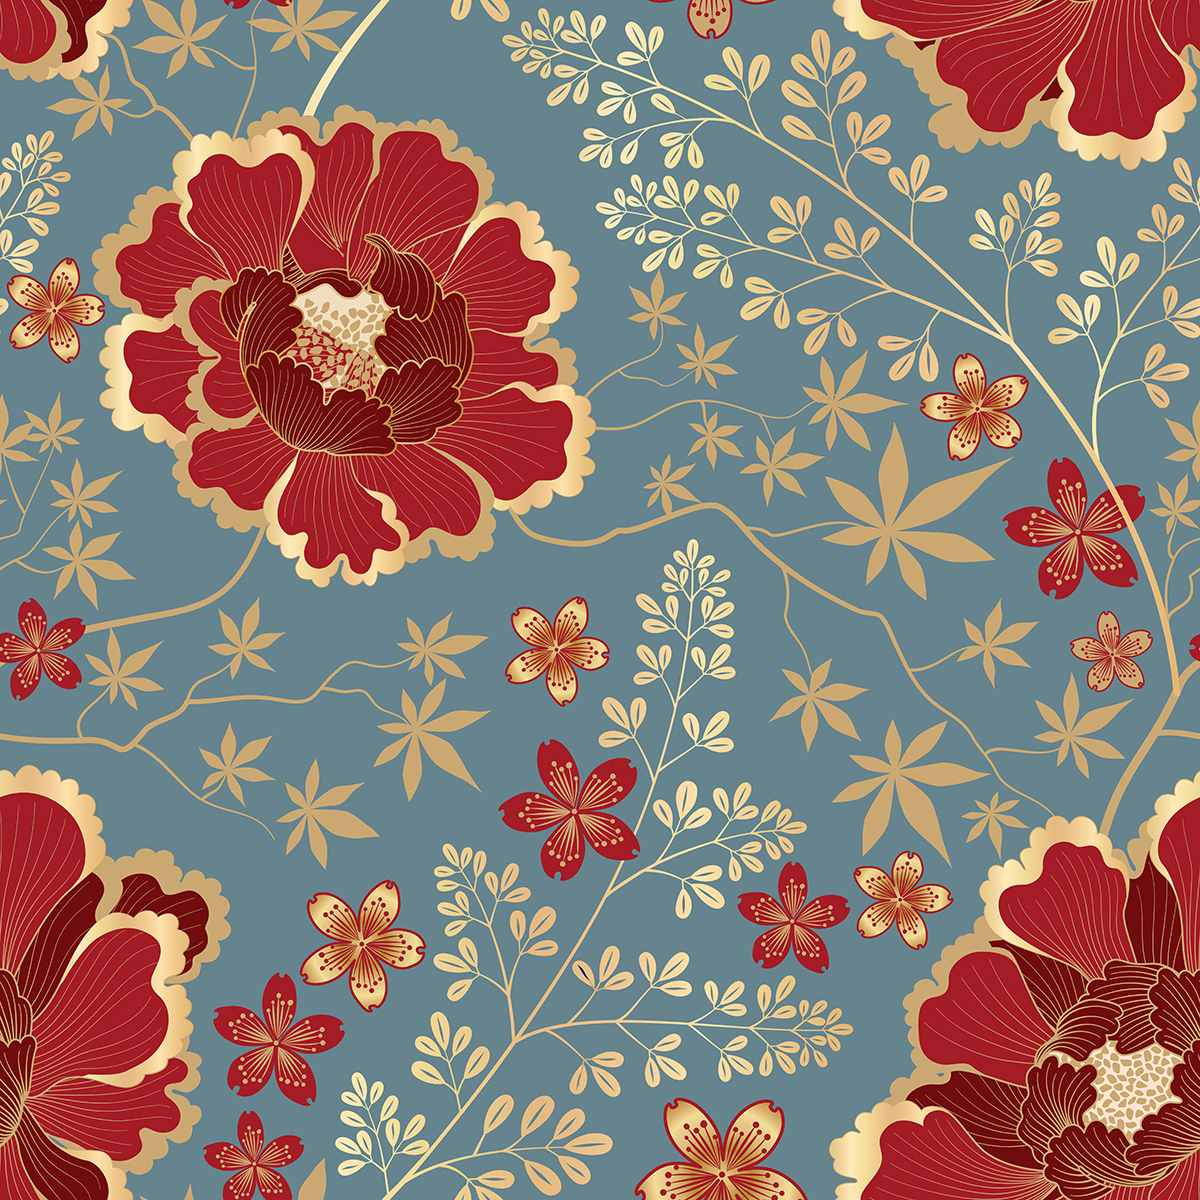 A pattern of red and gold flowers